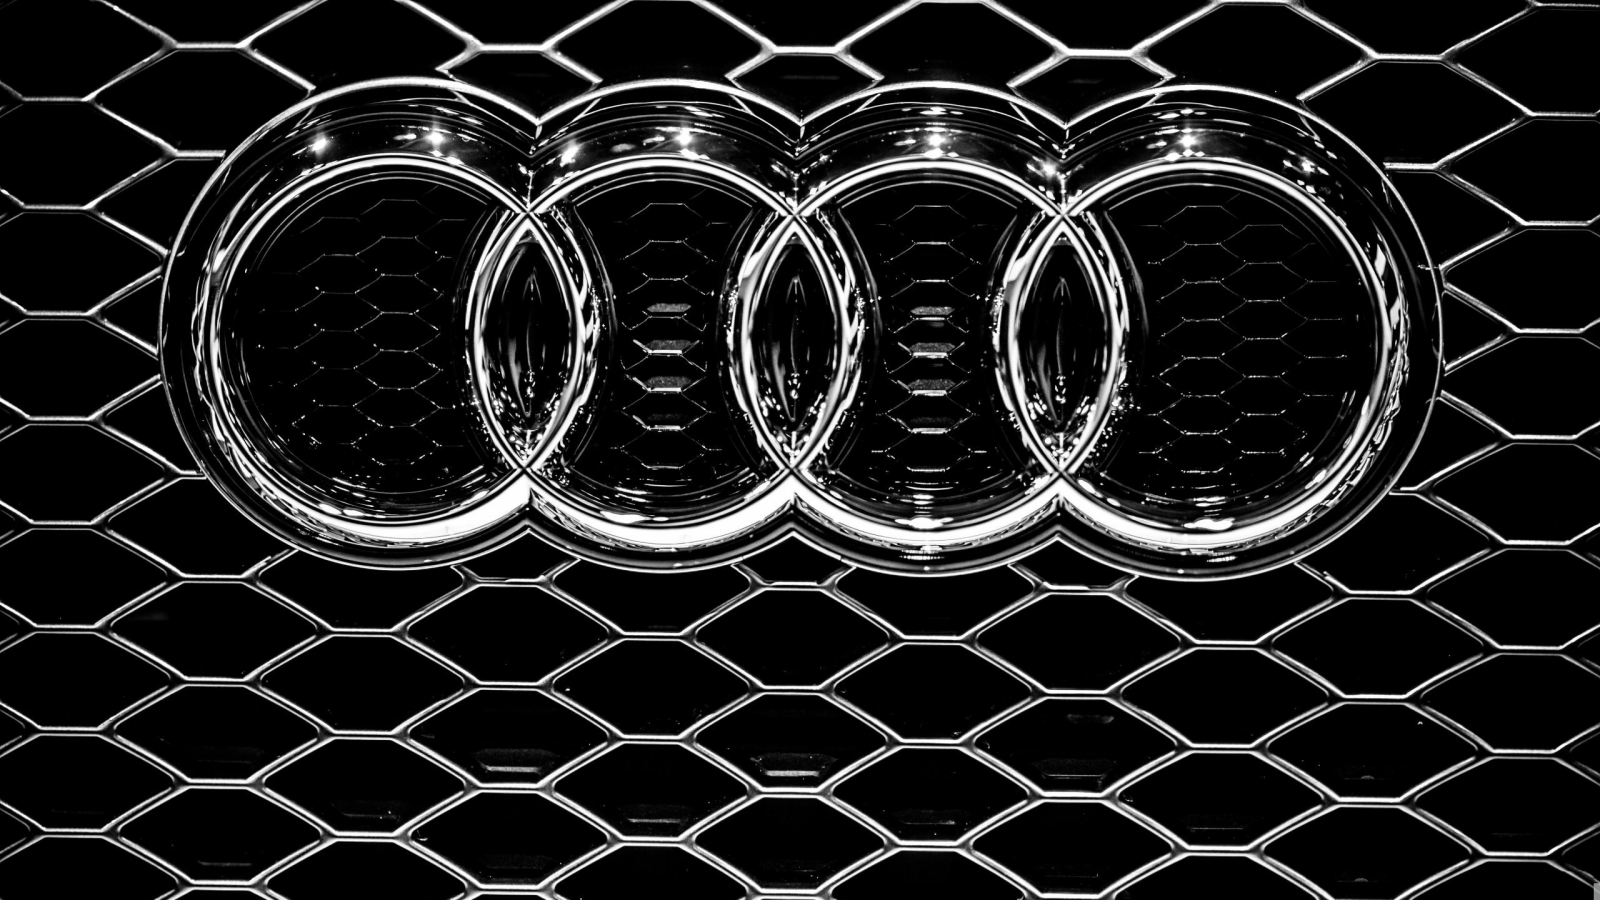 Audi Grille for 1600 x 900 HDTV resolution